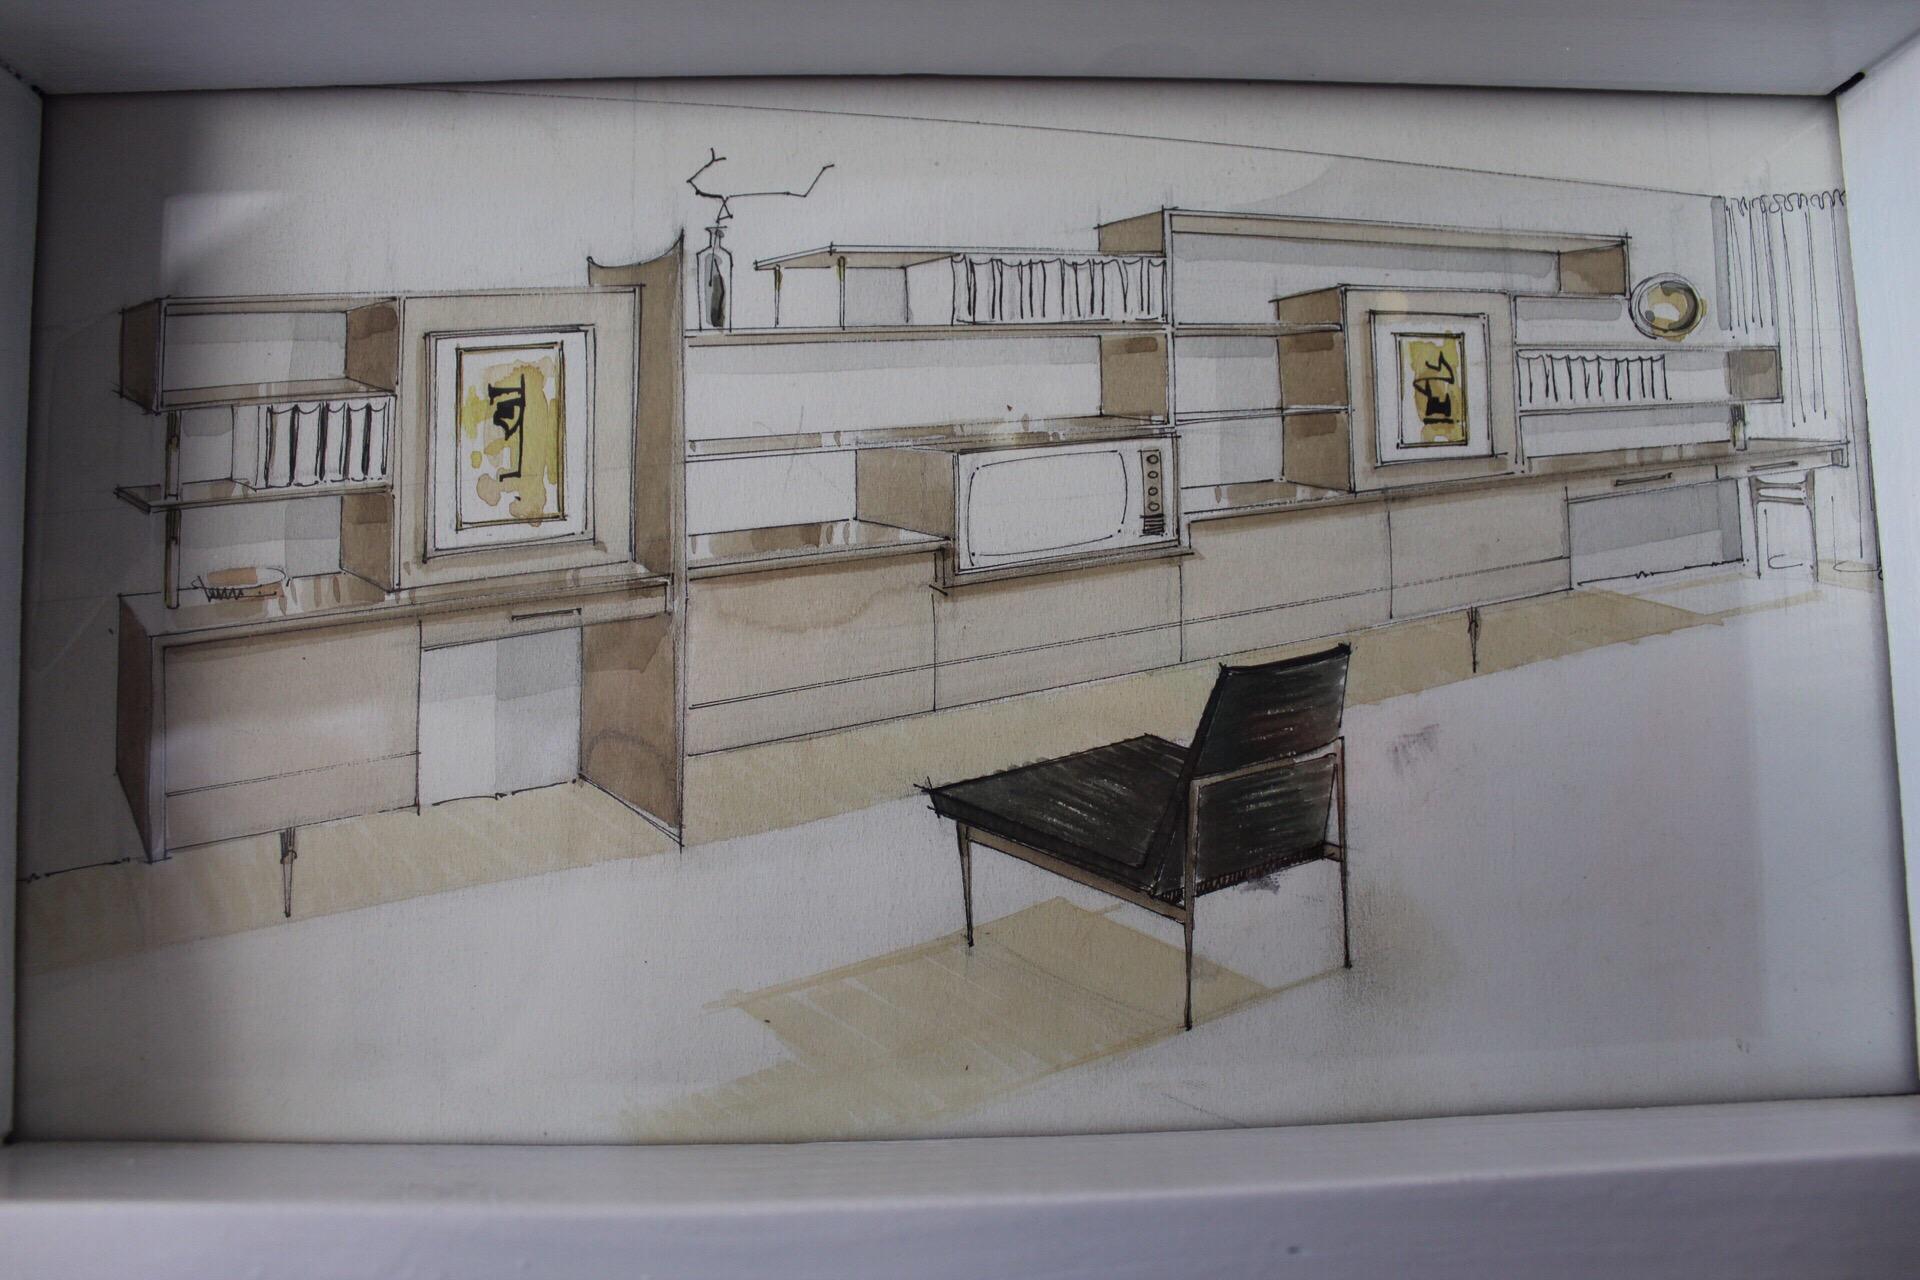 For your consideration, interior design sketch by Frank B. Kyle.
The measures includes the framework.